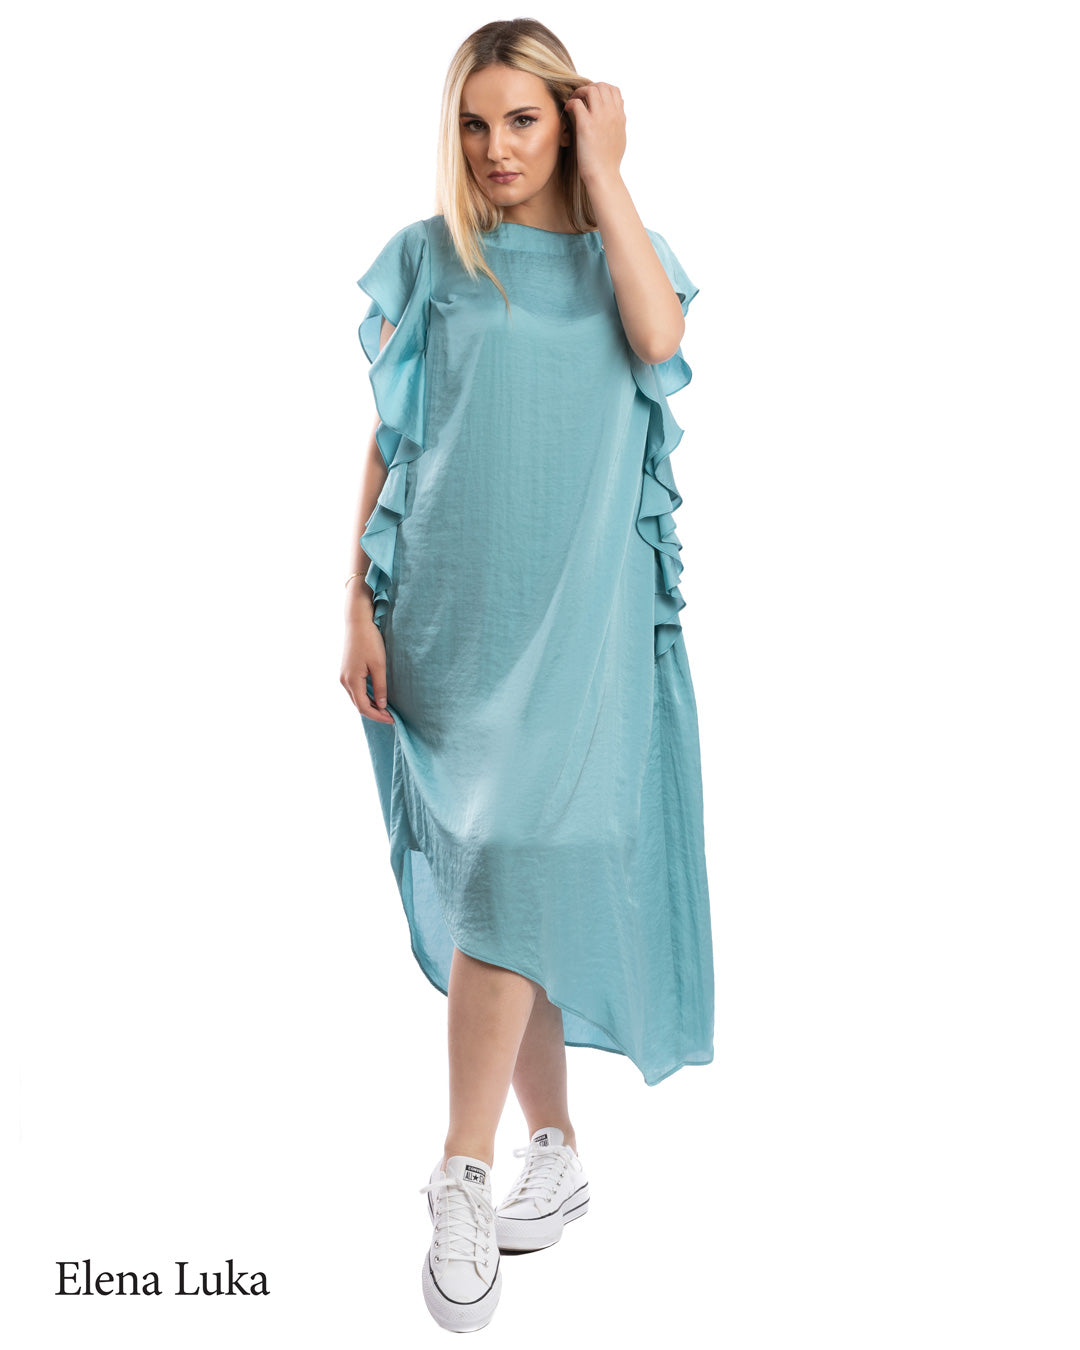 Must-Have Piece of the Week: Chic sky blue dress